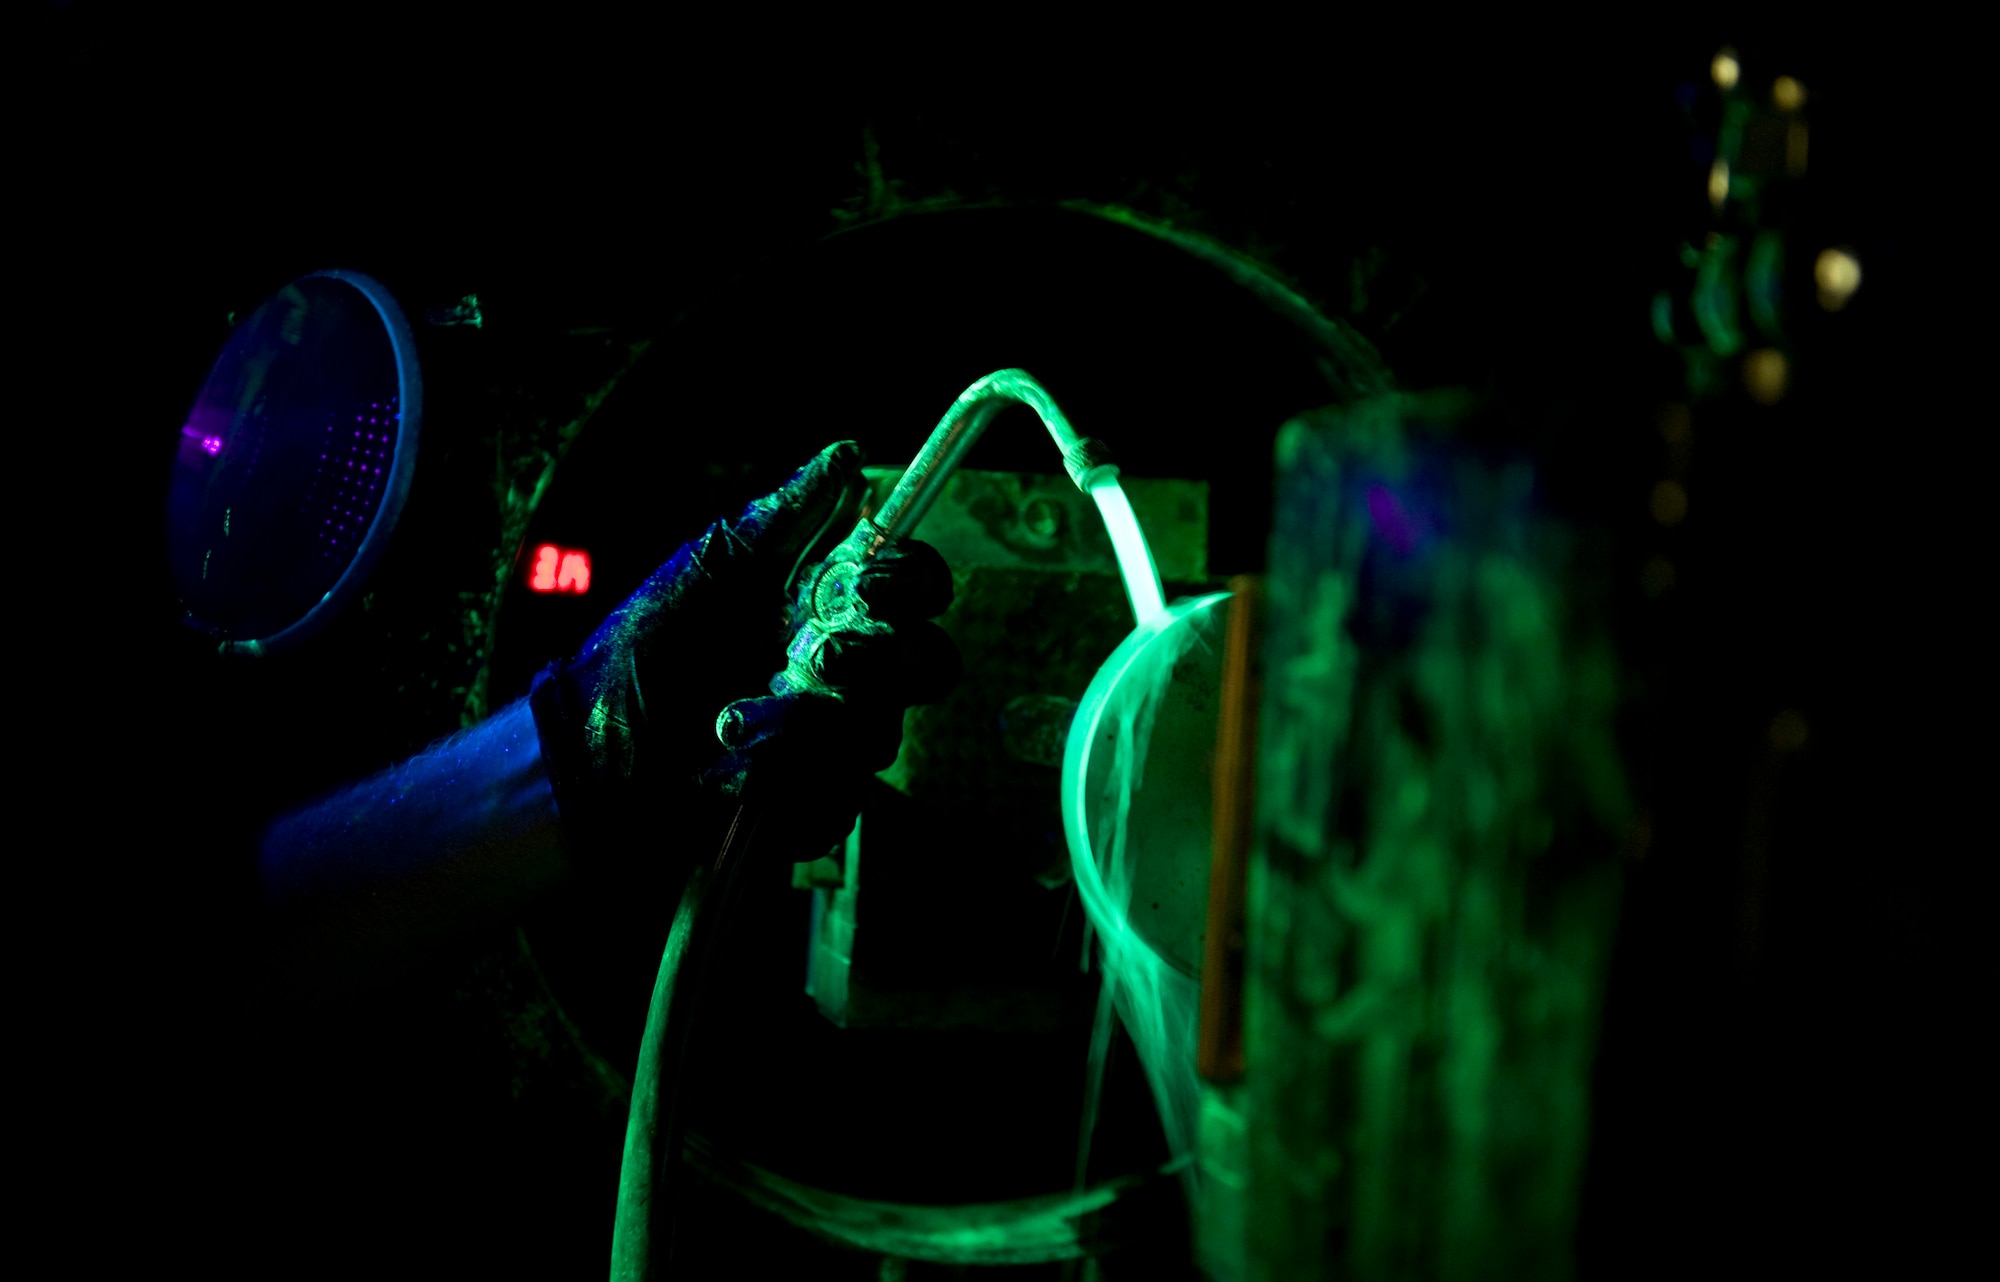 Joey Mabrey, a contractor with the 57th Maintanence Group, performs a fluorescent magnetic particle inspection at the Nondestructive Inspection Laboratory on Nellis Air Force Base, Nev., Aug. 11. Magnetic particle inspections cause the abnormalities, such as cracks on aircraft parts, to be visible. (U.S. Air Force photo by Airman 1st Class Rachel Loftis)